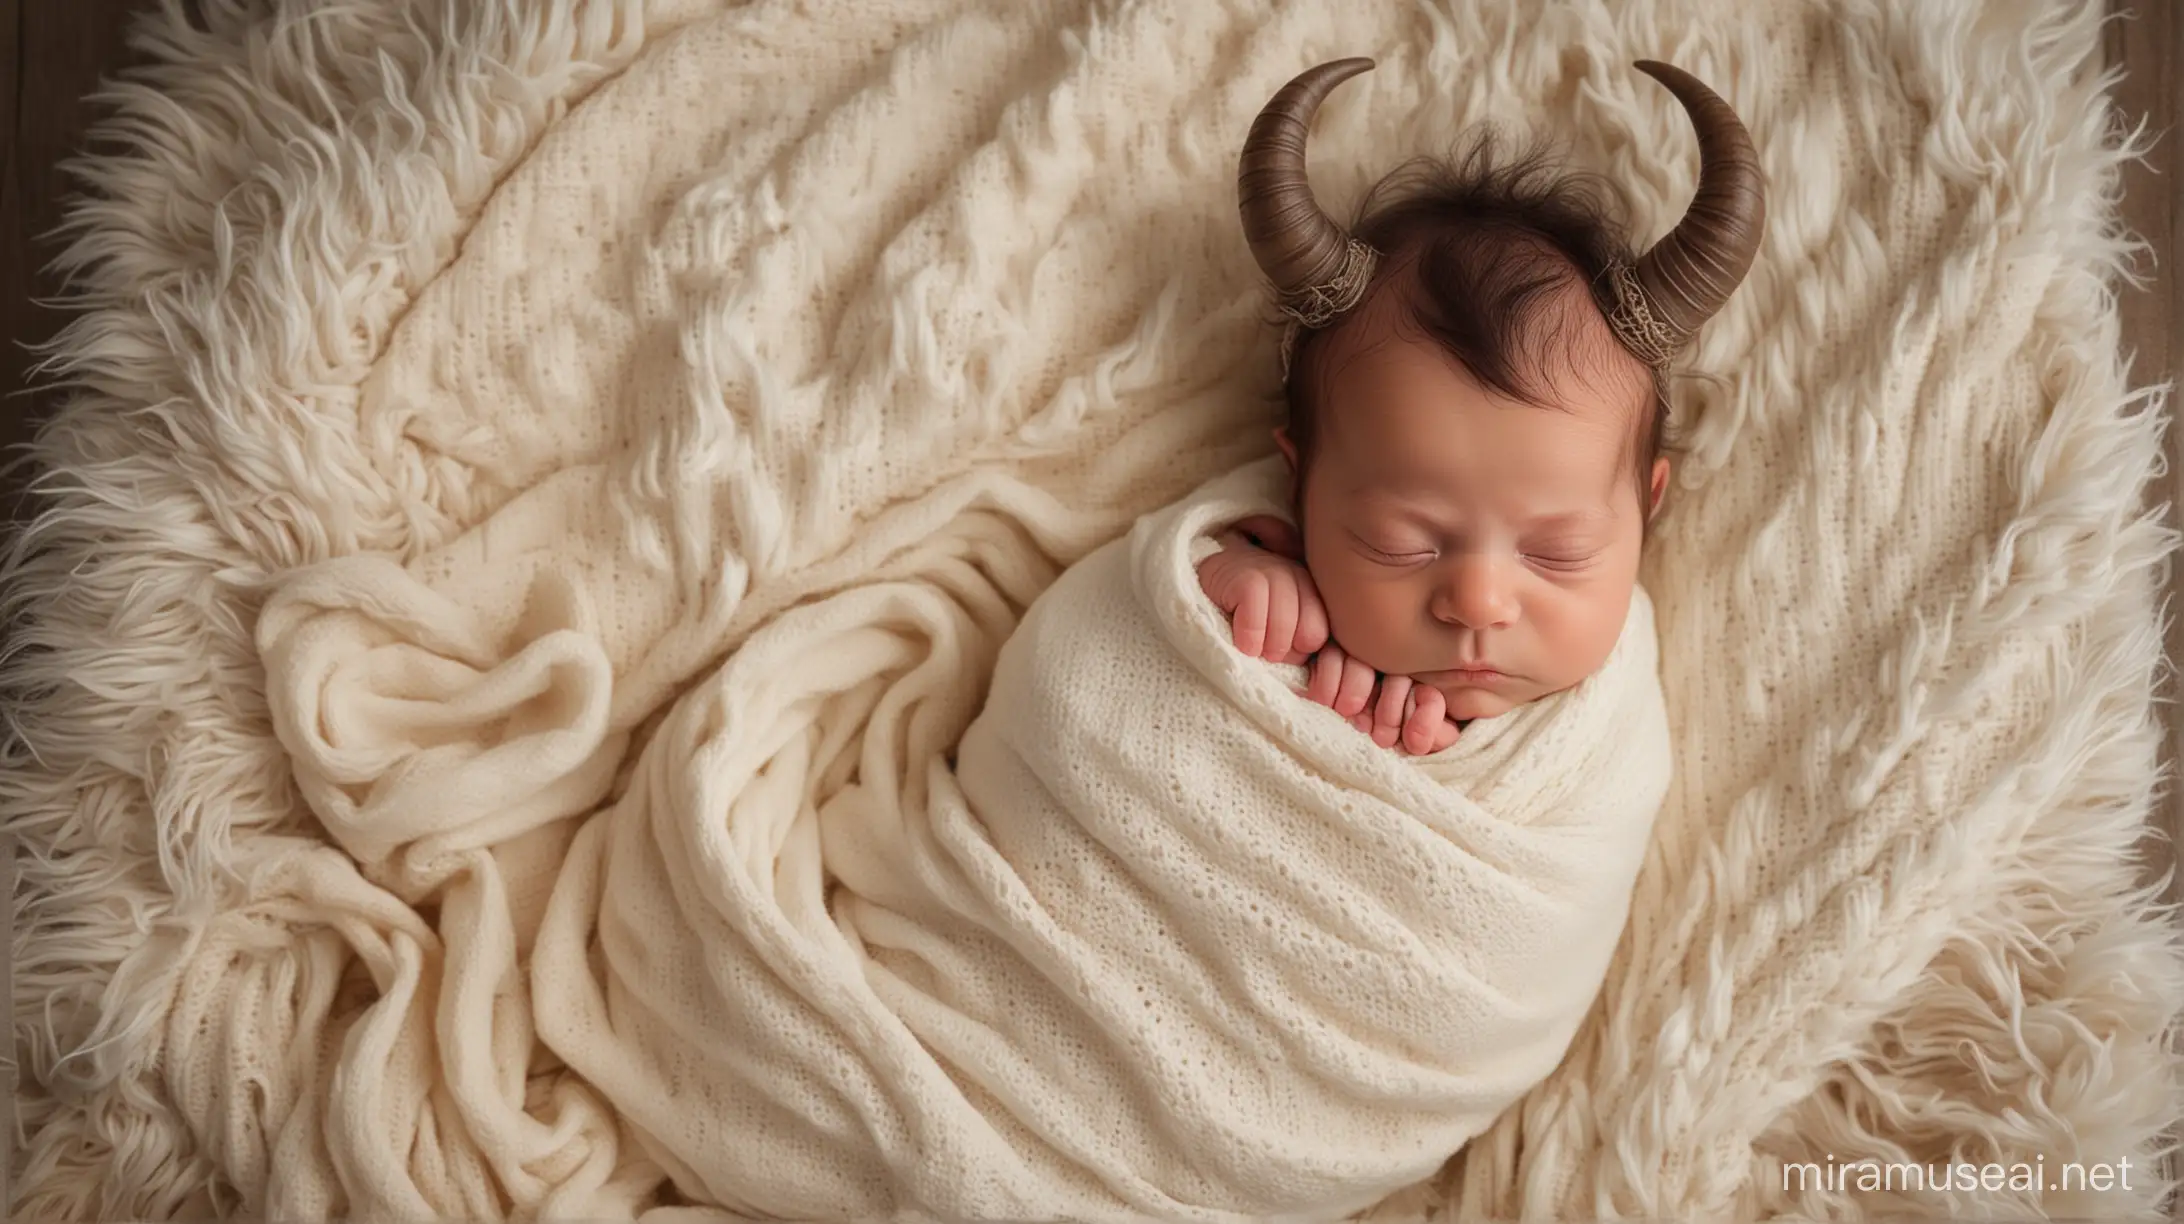 Enchanting Newborn Baby with Fantasy Horns Surrounded by Loving Parents